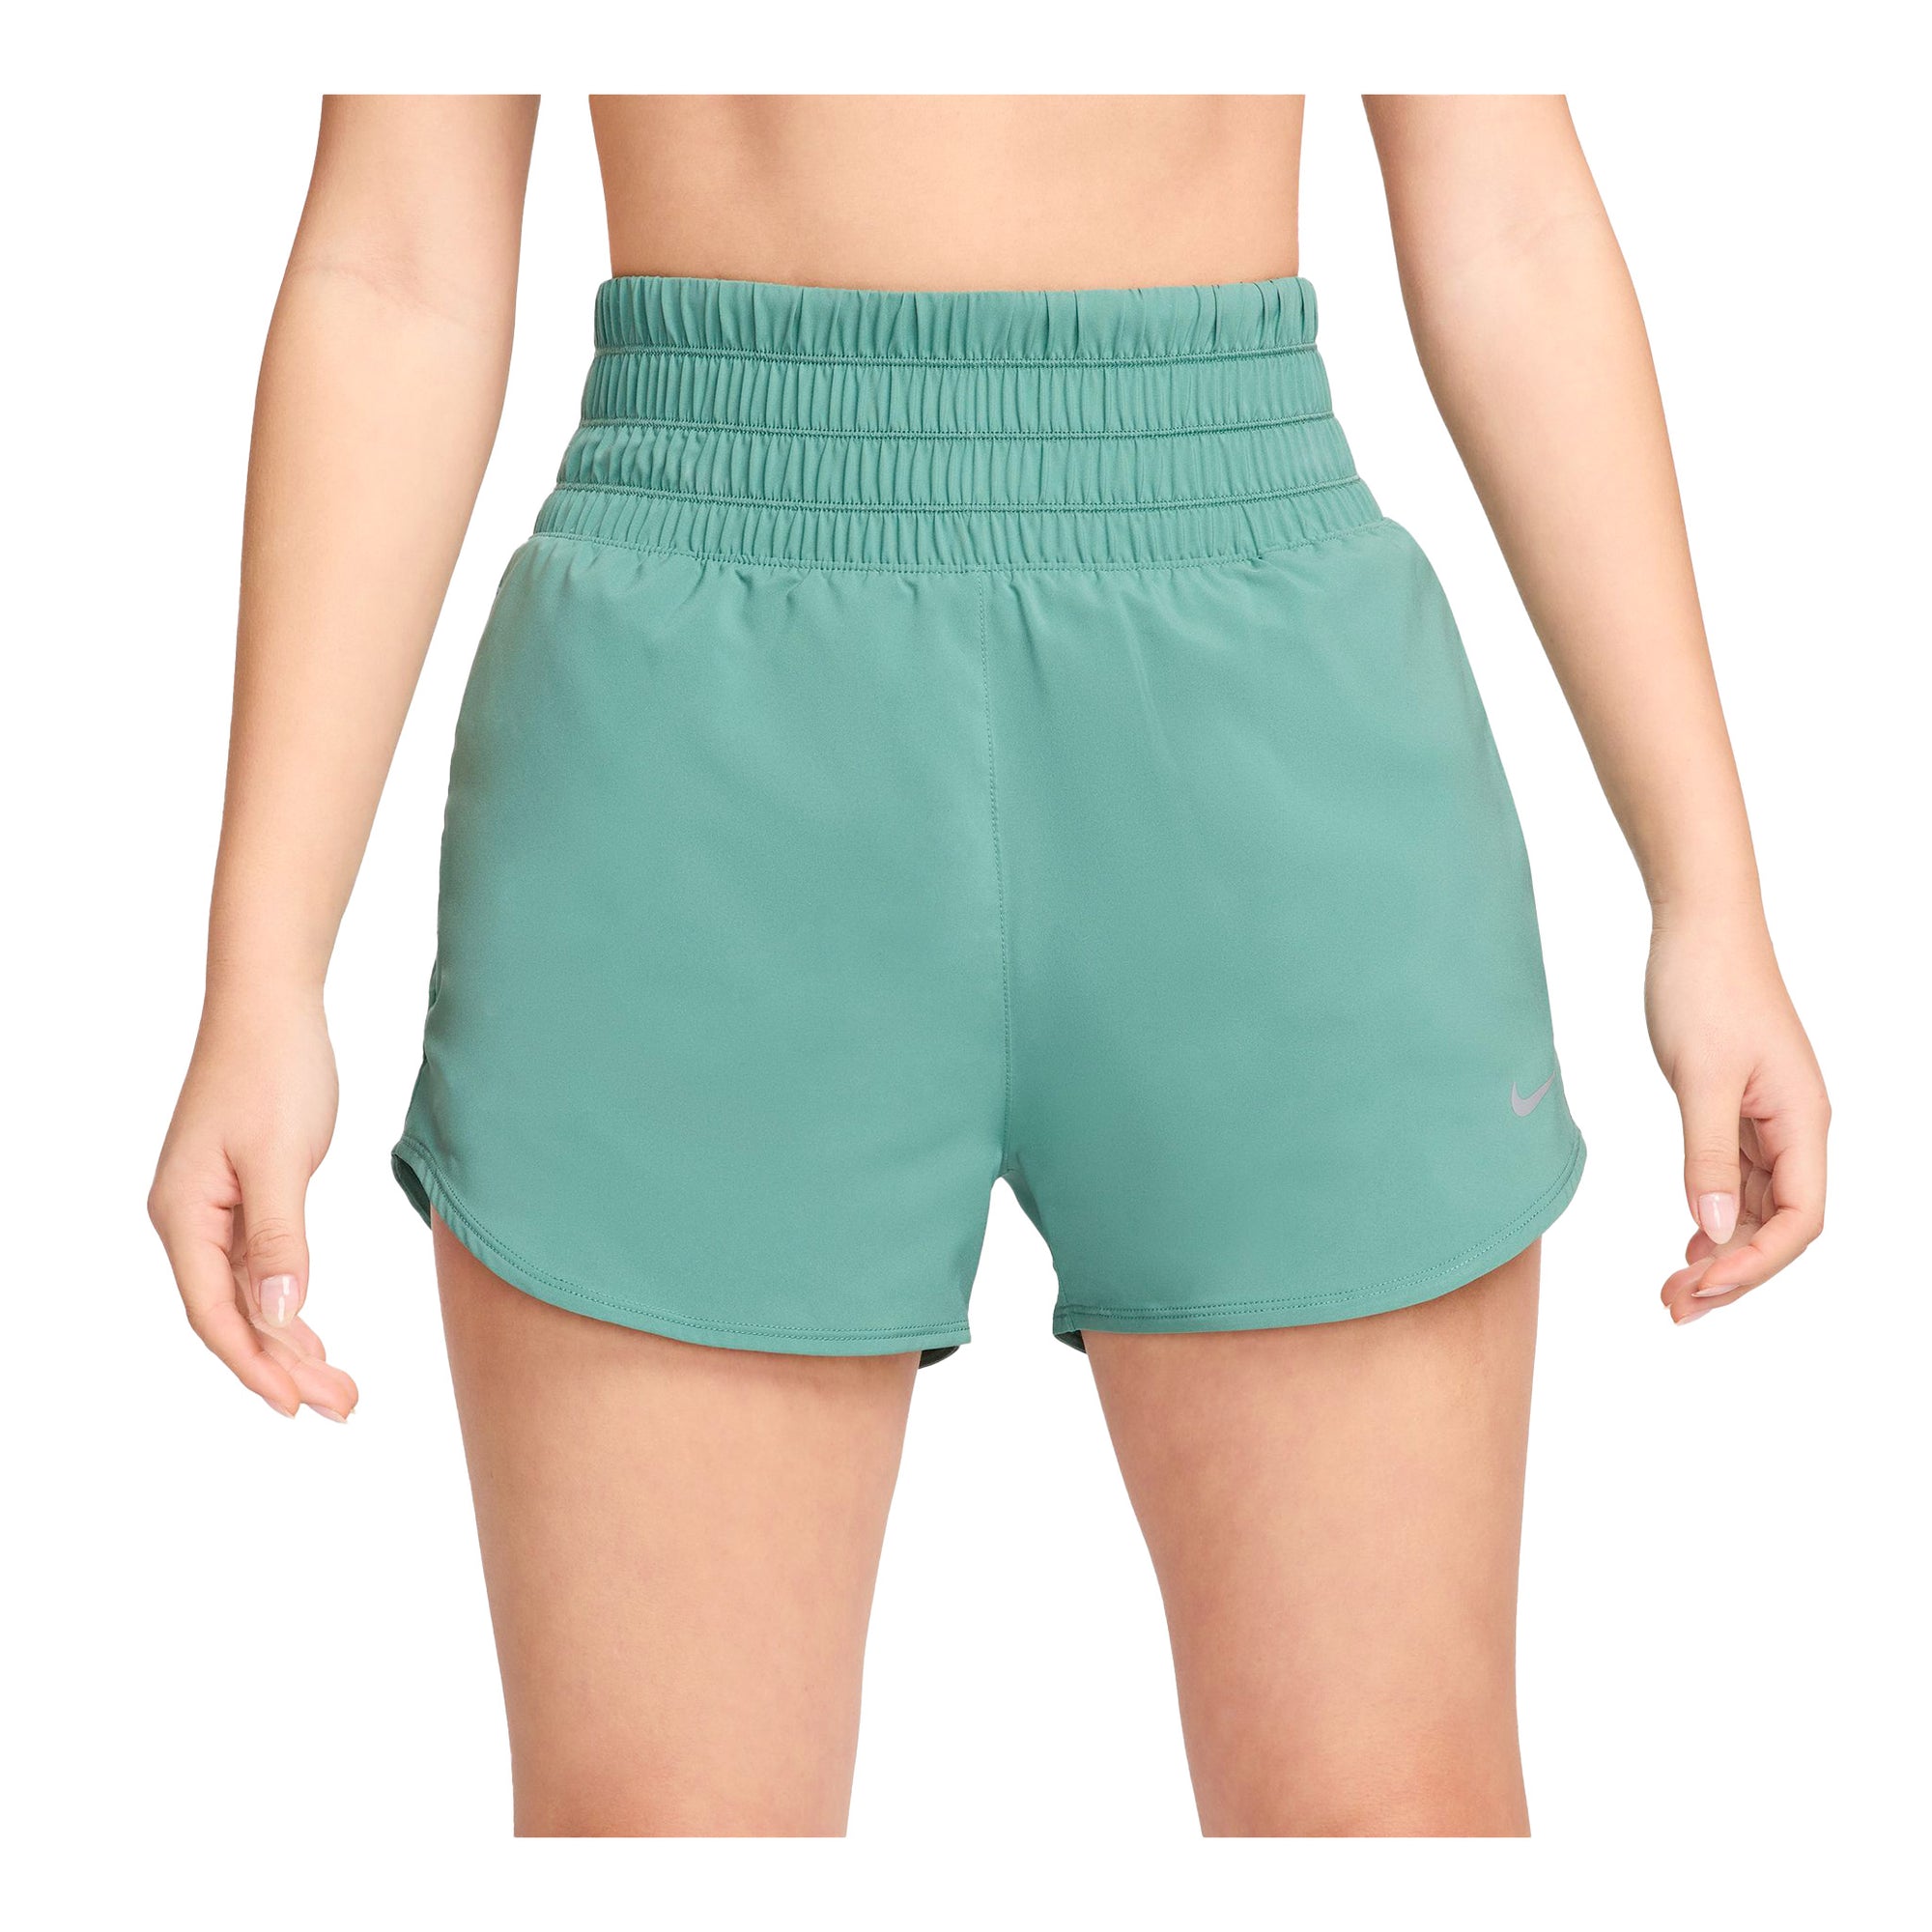 NIKE ONE DRI-FIT ULTRA HIGH-WAISTED 3" BRIEF-LINED - WOMEN